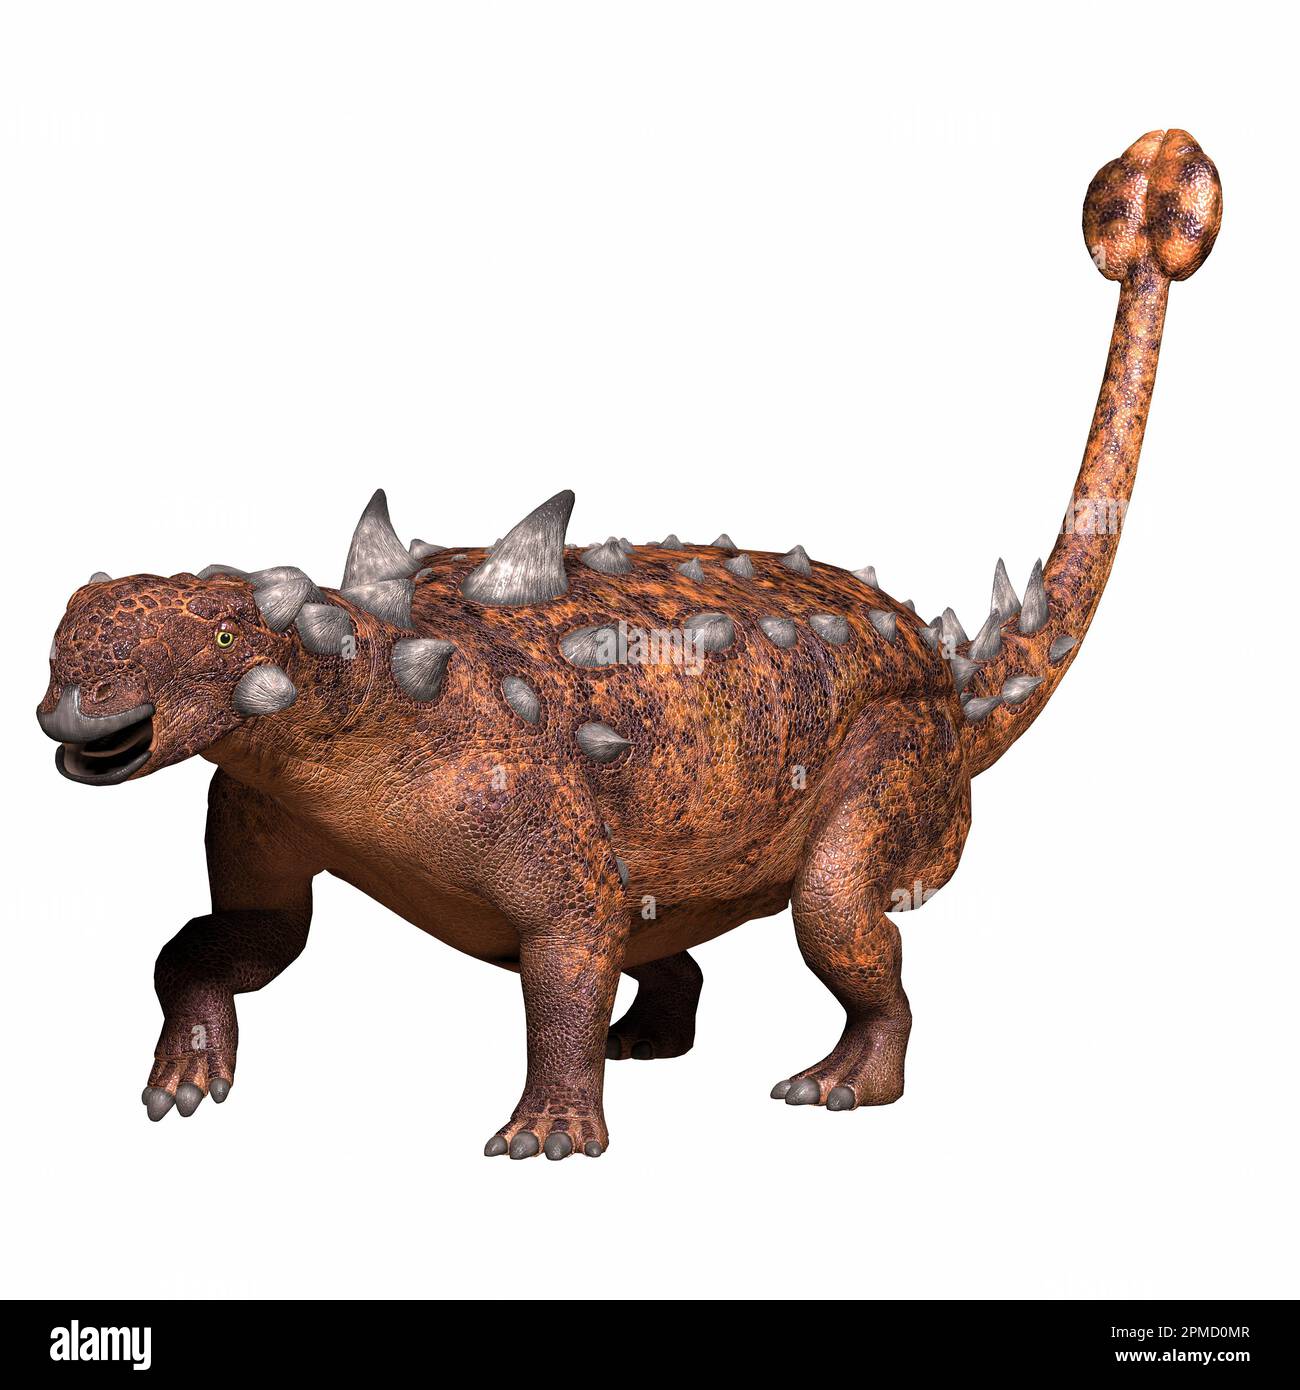 Euoplocephalus was an Ankylosaur armored dinosaur that lived in Alberta, Canada during the Cretaceous Period. Stock Photo